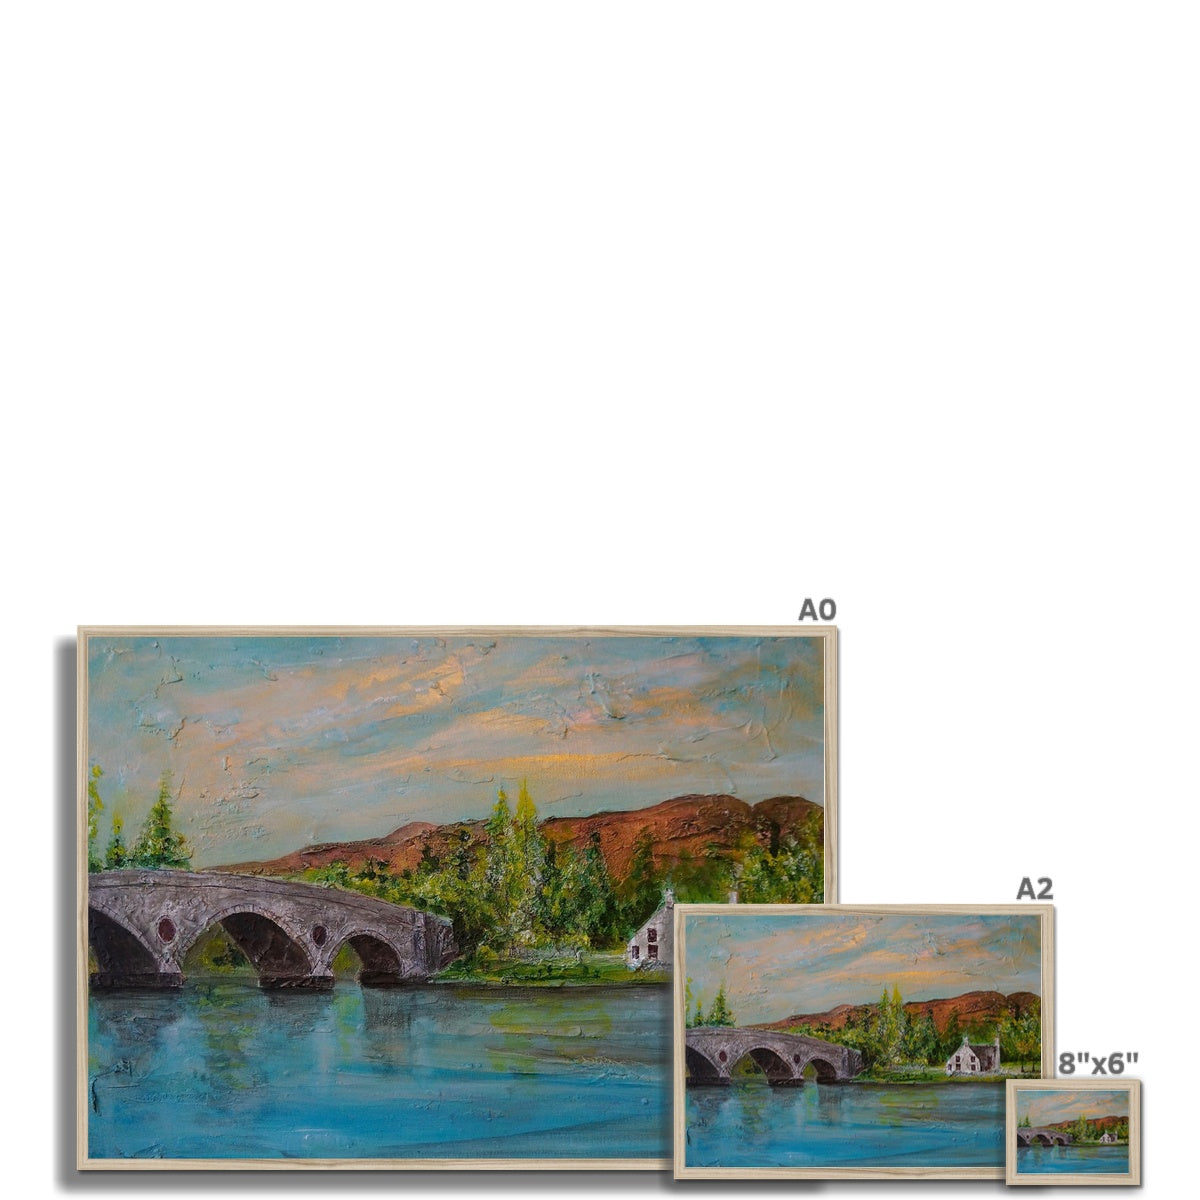 Kenmore Bridge ii Painting | Framed Prints From Scotland-Framed Prints-Scottish Highlands & Lowlands Art Gallery-Paintings, Prints, Homeware, Art Gifts From Scotland By Scottish Artist Kevin Hunter